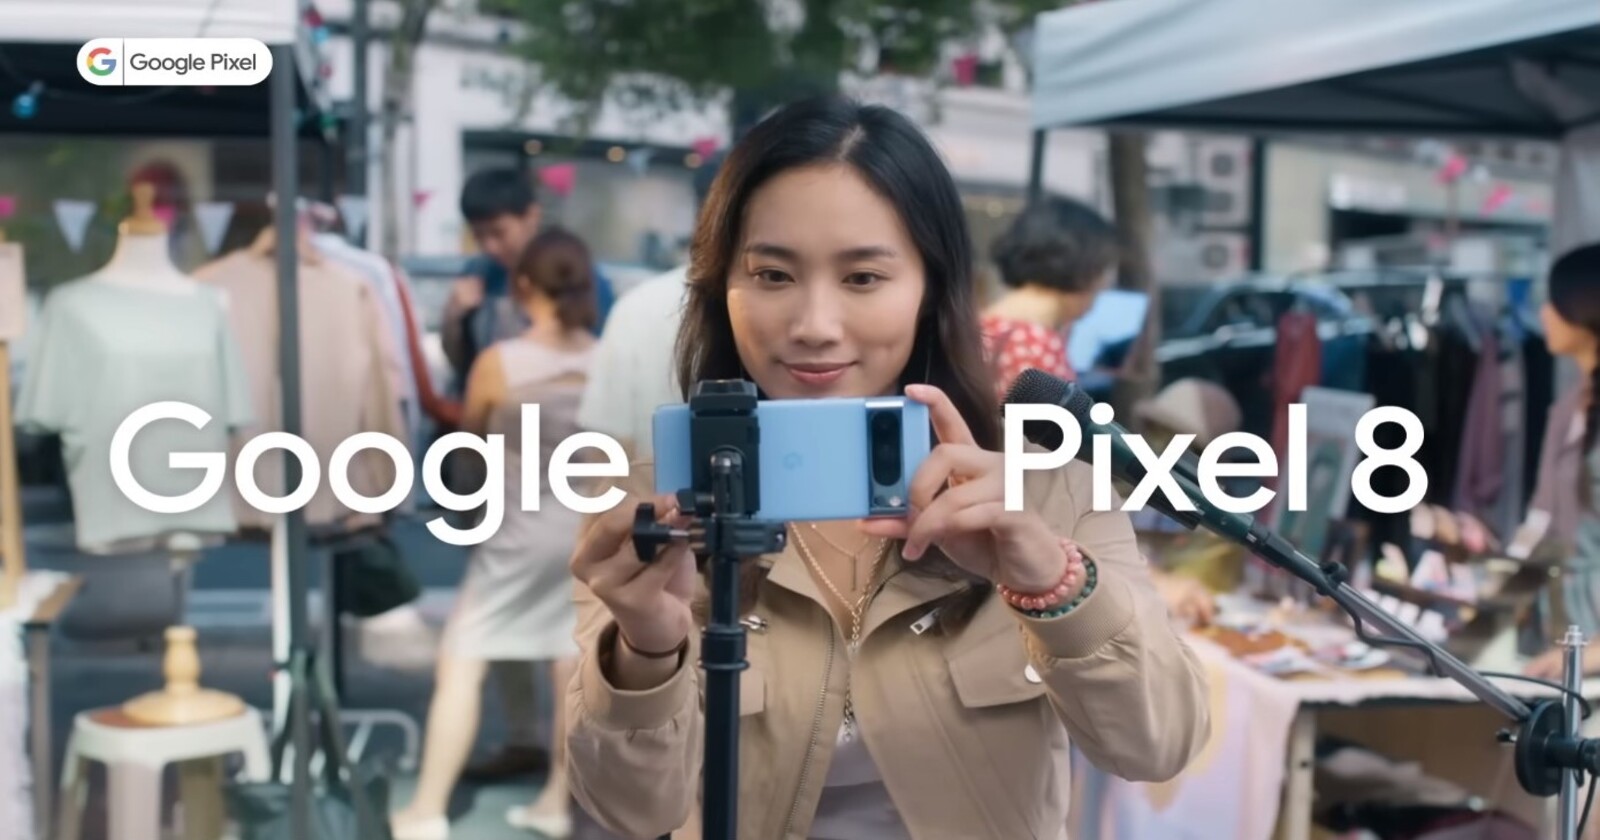 Google shows off Pixel 8's 'Audio Magic Eraser' in collaboration with Taiwan's local music culture